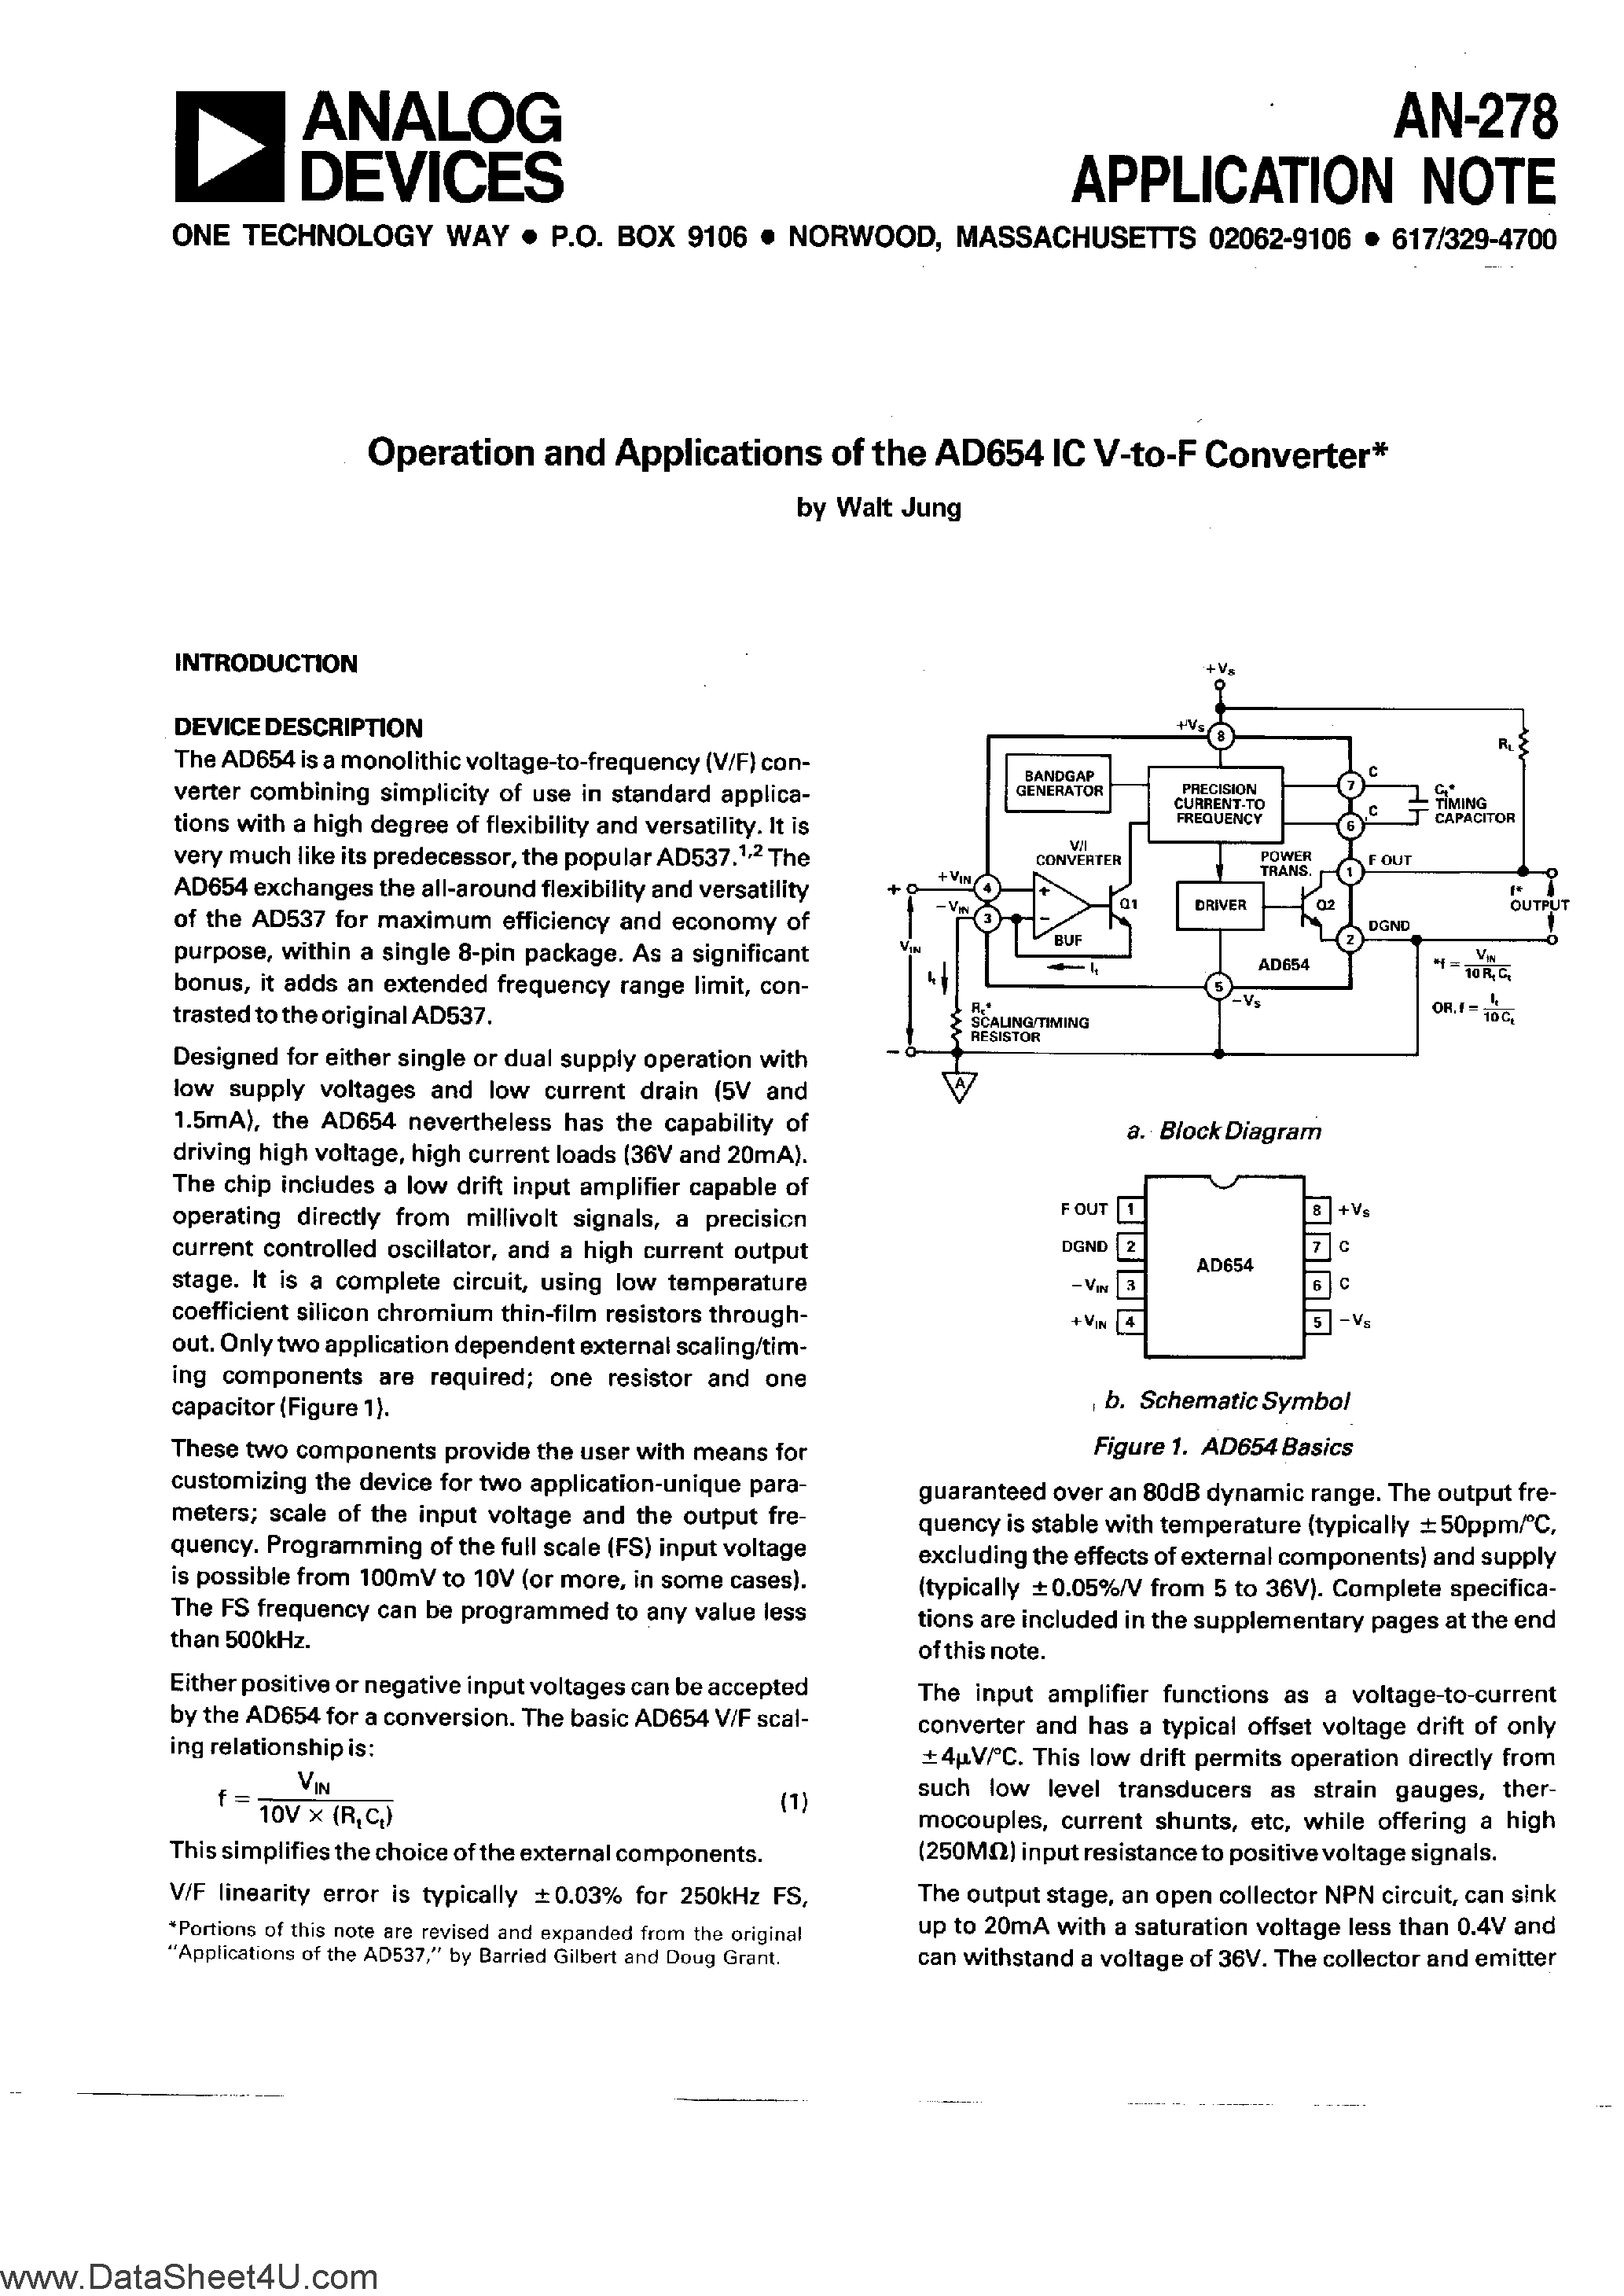 Datasheet AN-278 - Operation and Applications of the AD654 IC V to F Converter page 1